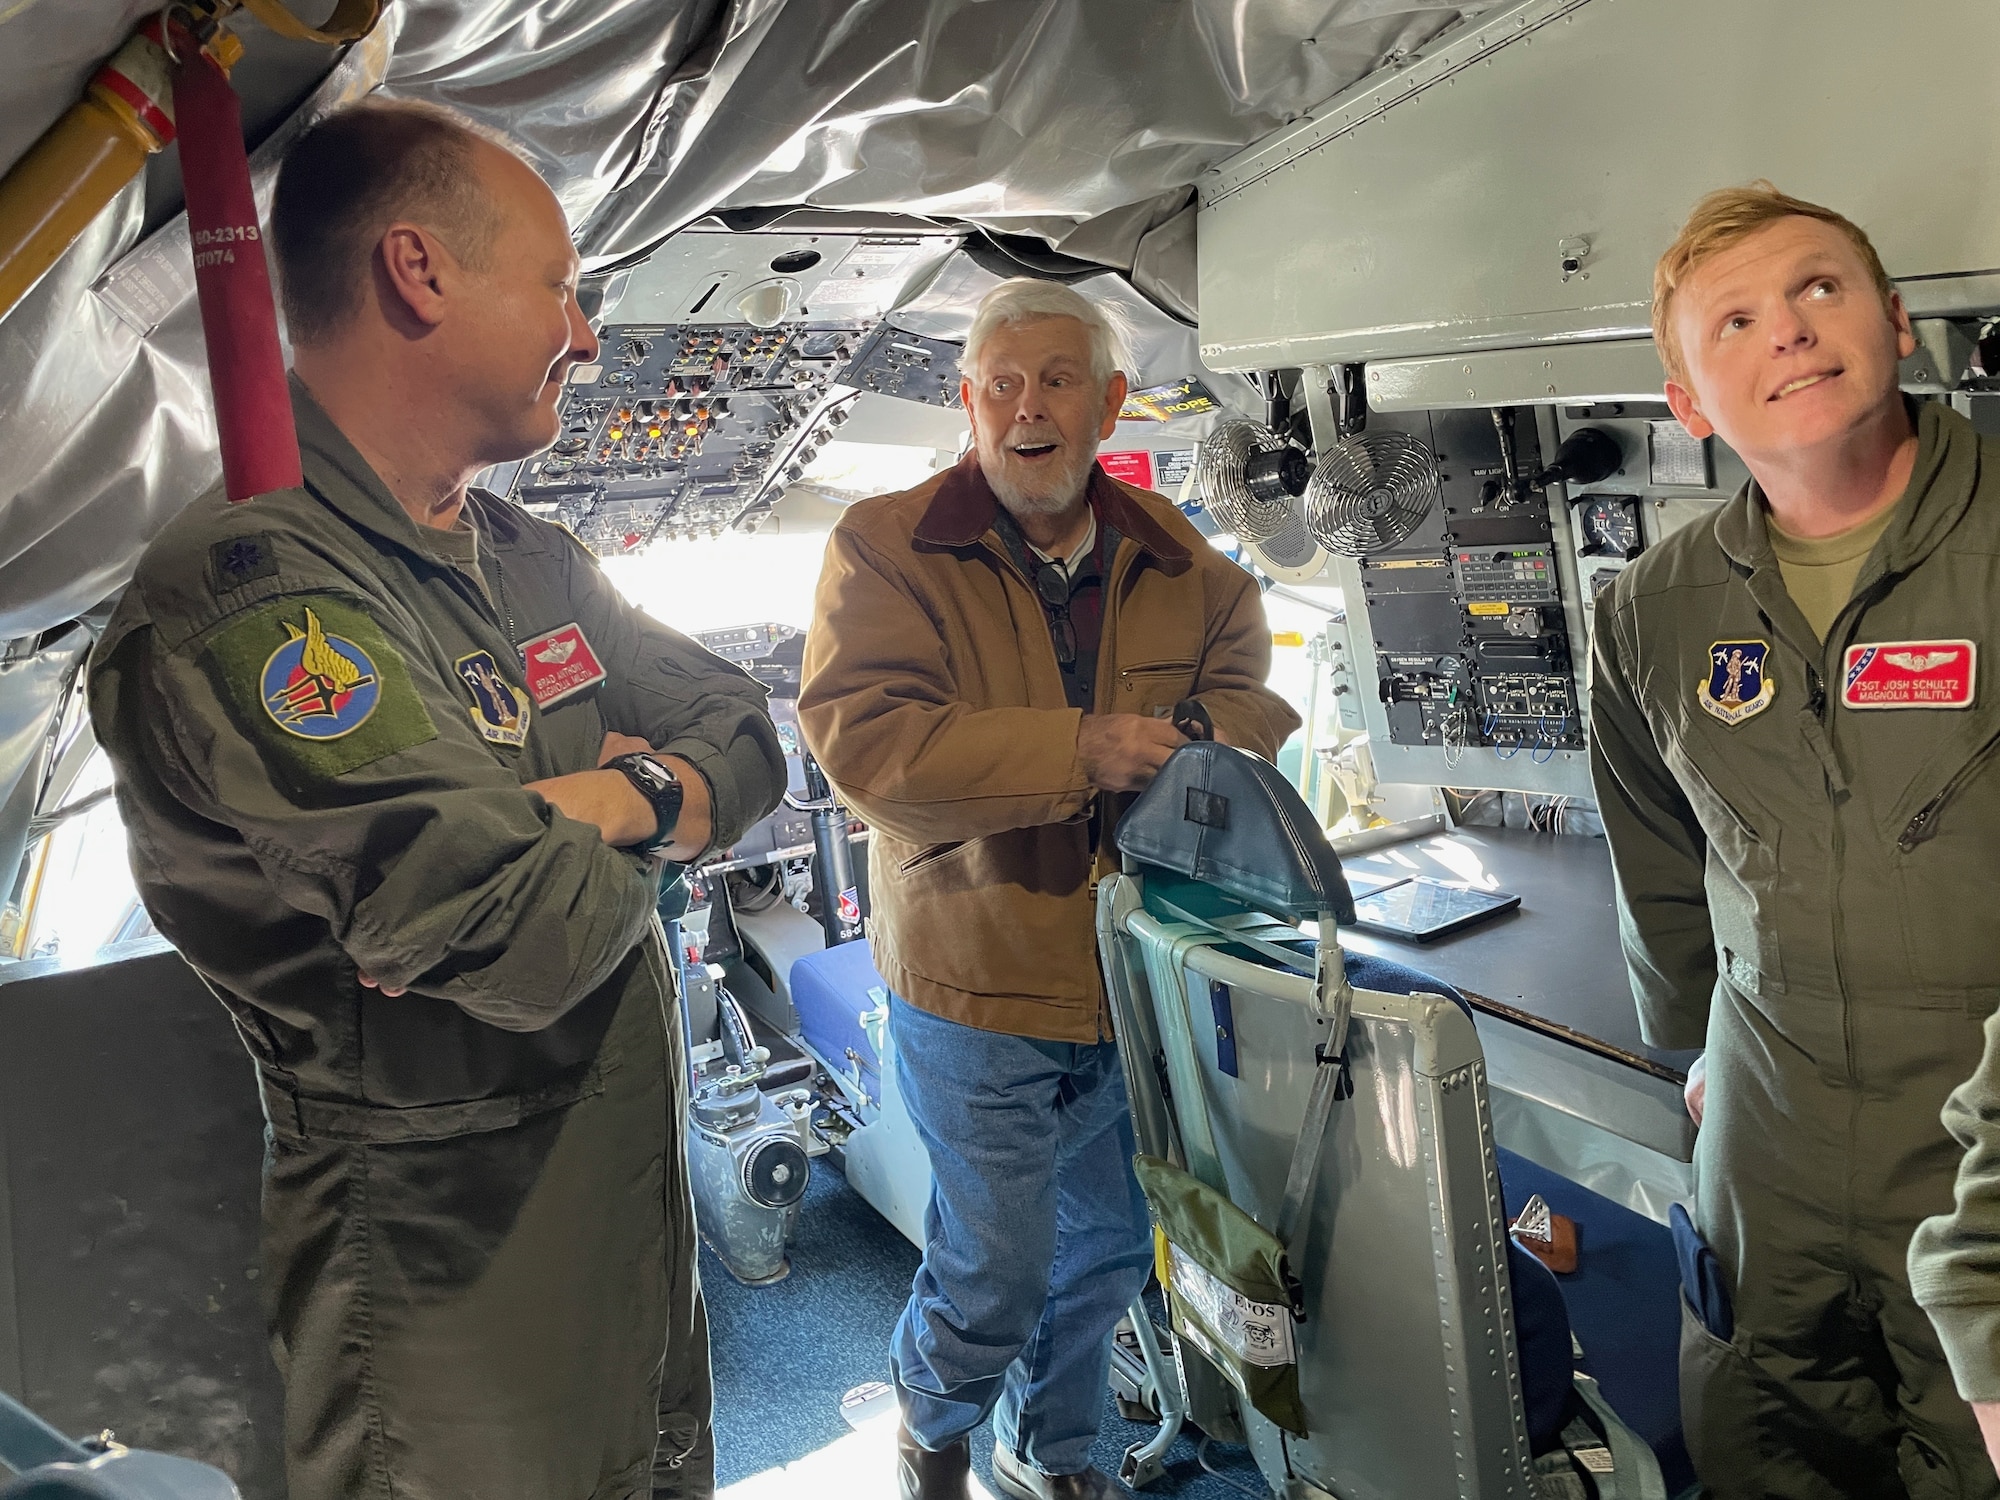 U.S. Air Force Lt. Col. Brad Anthony, a KC-135R pilot, and Tech. Sgt. Joshua Schultz, a boom operator, who are both with the 153rd Air Refueling Squadron, stand with Vietnam veteran James Roberts inside the cockpit of a KC-135R Stratotanker aircraft, Nov. 6, 2021, at Key Field Air National Guard Base, Mississippi.